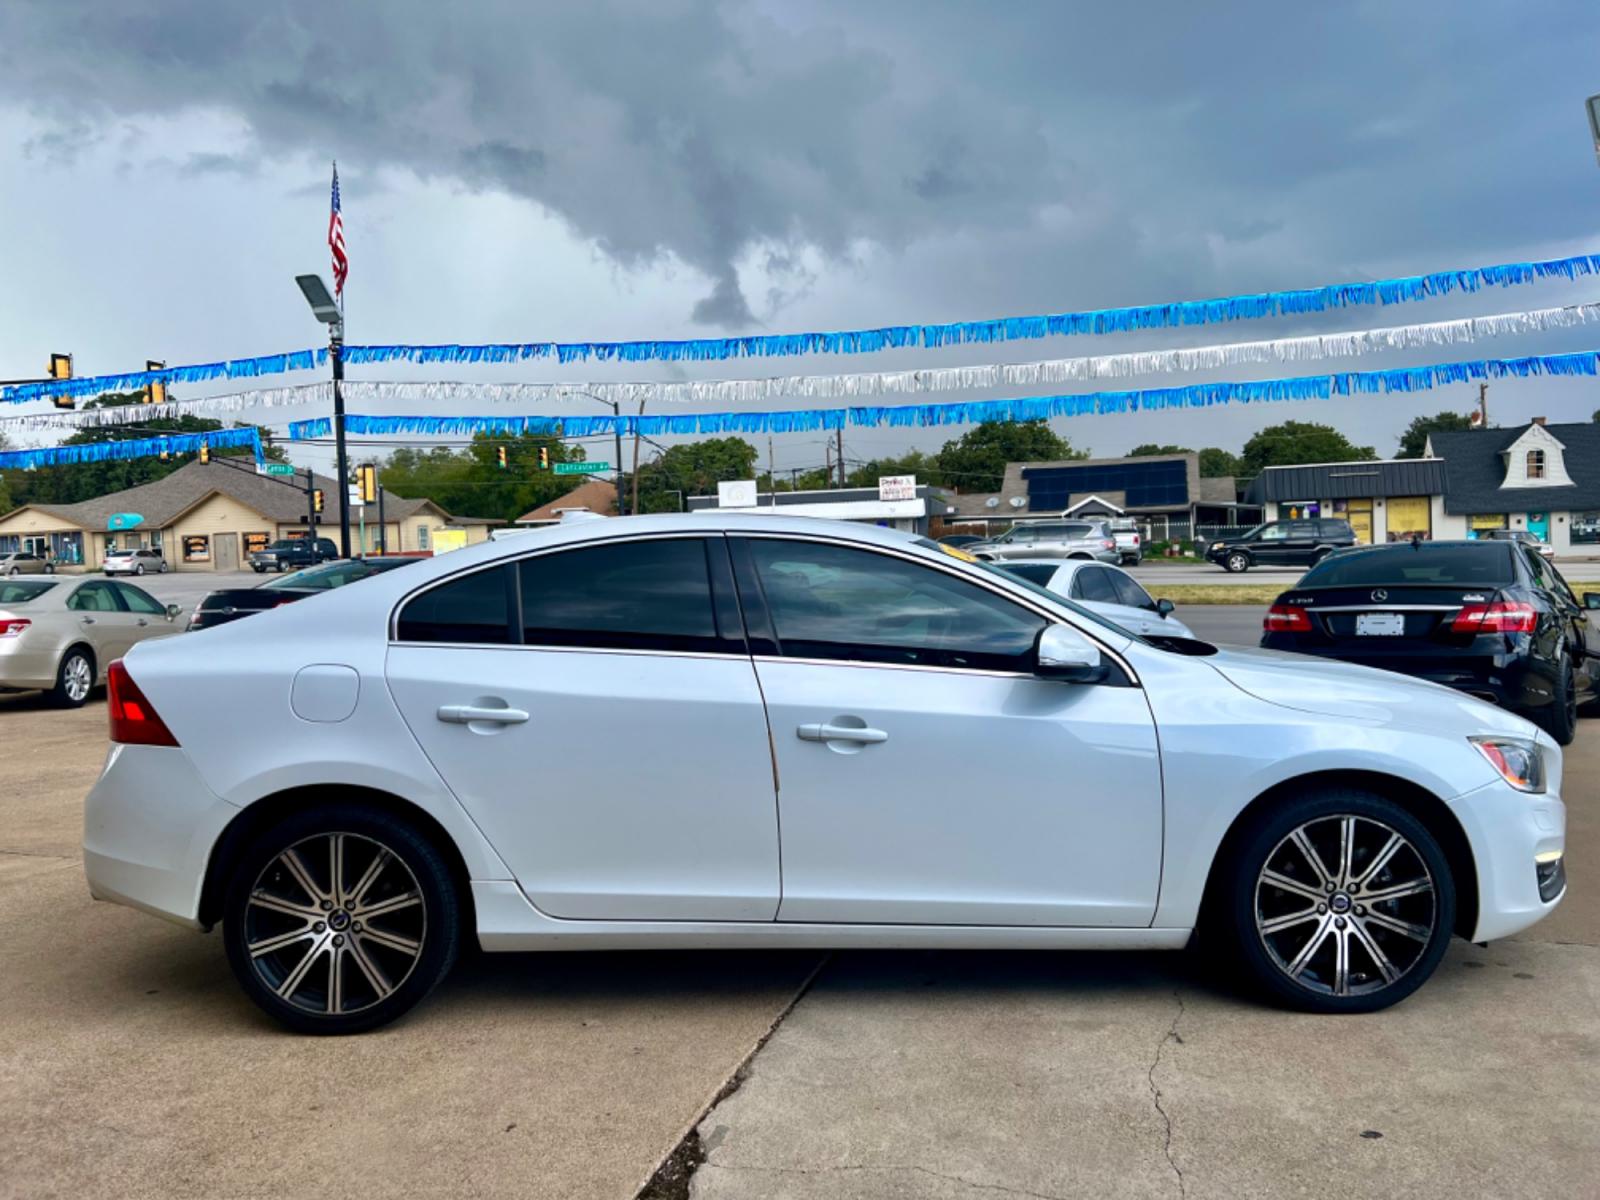 2014 WHITE VOLVO S60 T5 (YV1612FS1E2) , located at 5900 E. Lancaster Ave., Fort Worth, TX, 76112, (817) 457-5456, 0.000000, 0.000000 - This is a 2014 VOLVO S60 T5 4 DOOR SEDAN that is in excellent condition. There are no dents or scratches. The interior is clean with no rips or tears or stains. All power windows, door locks and seats. Ice cold AC for those hot Texas summer days. It is equipped with a CD player, AM/FM radio, AUX por - Photo #7